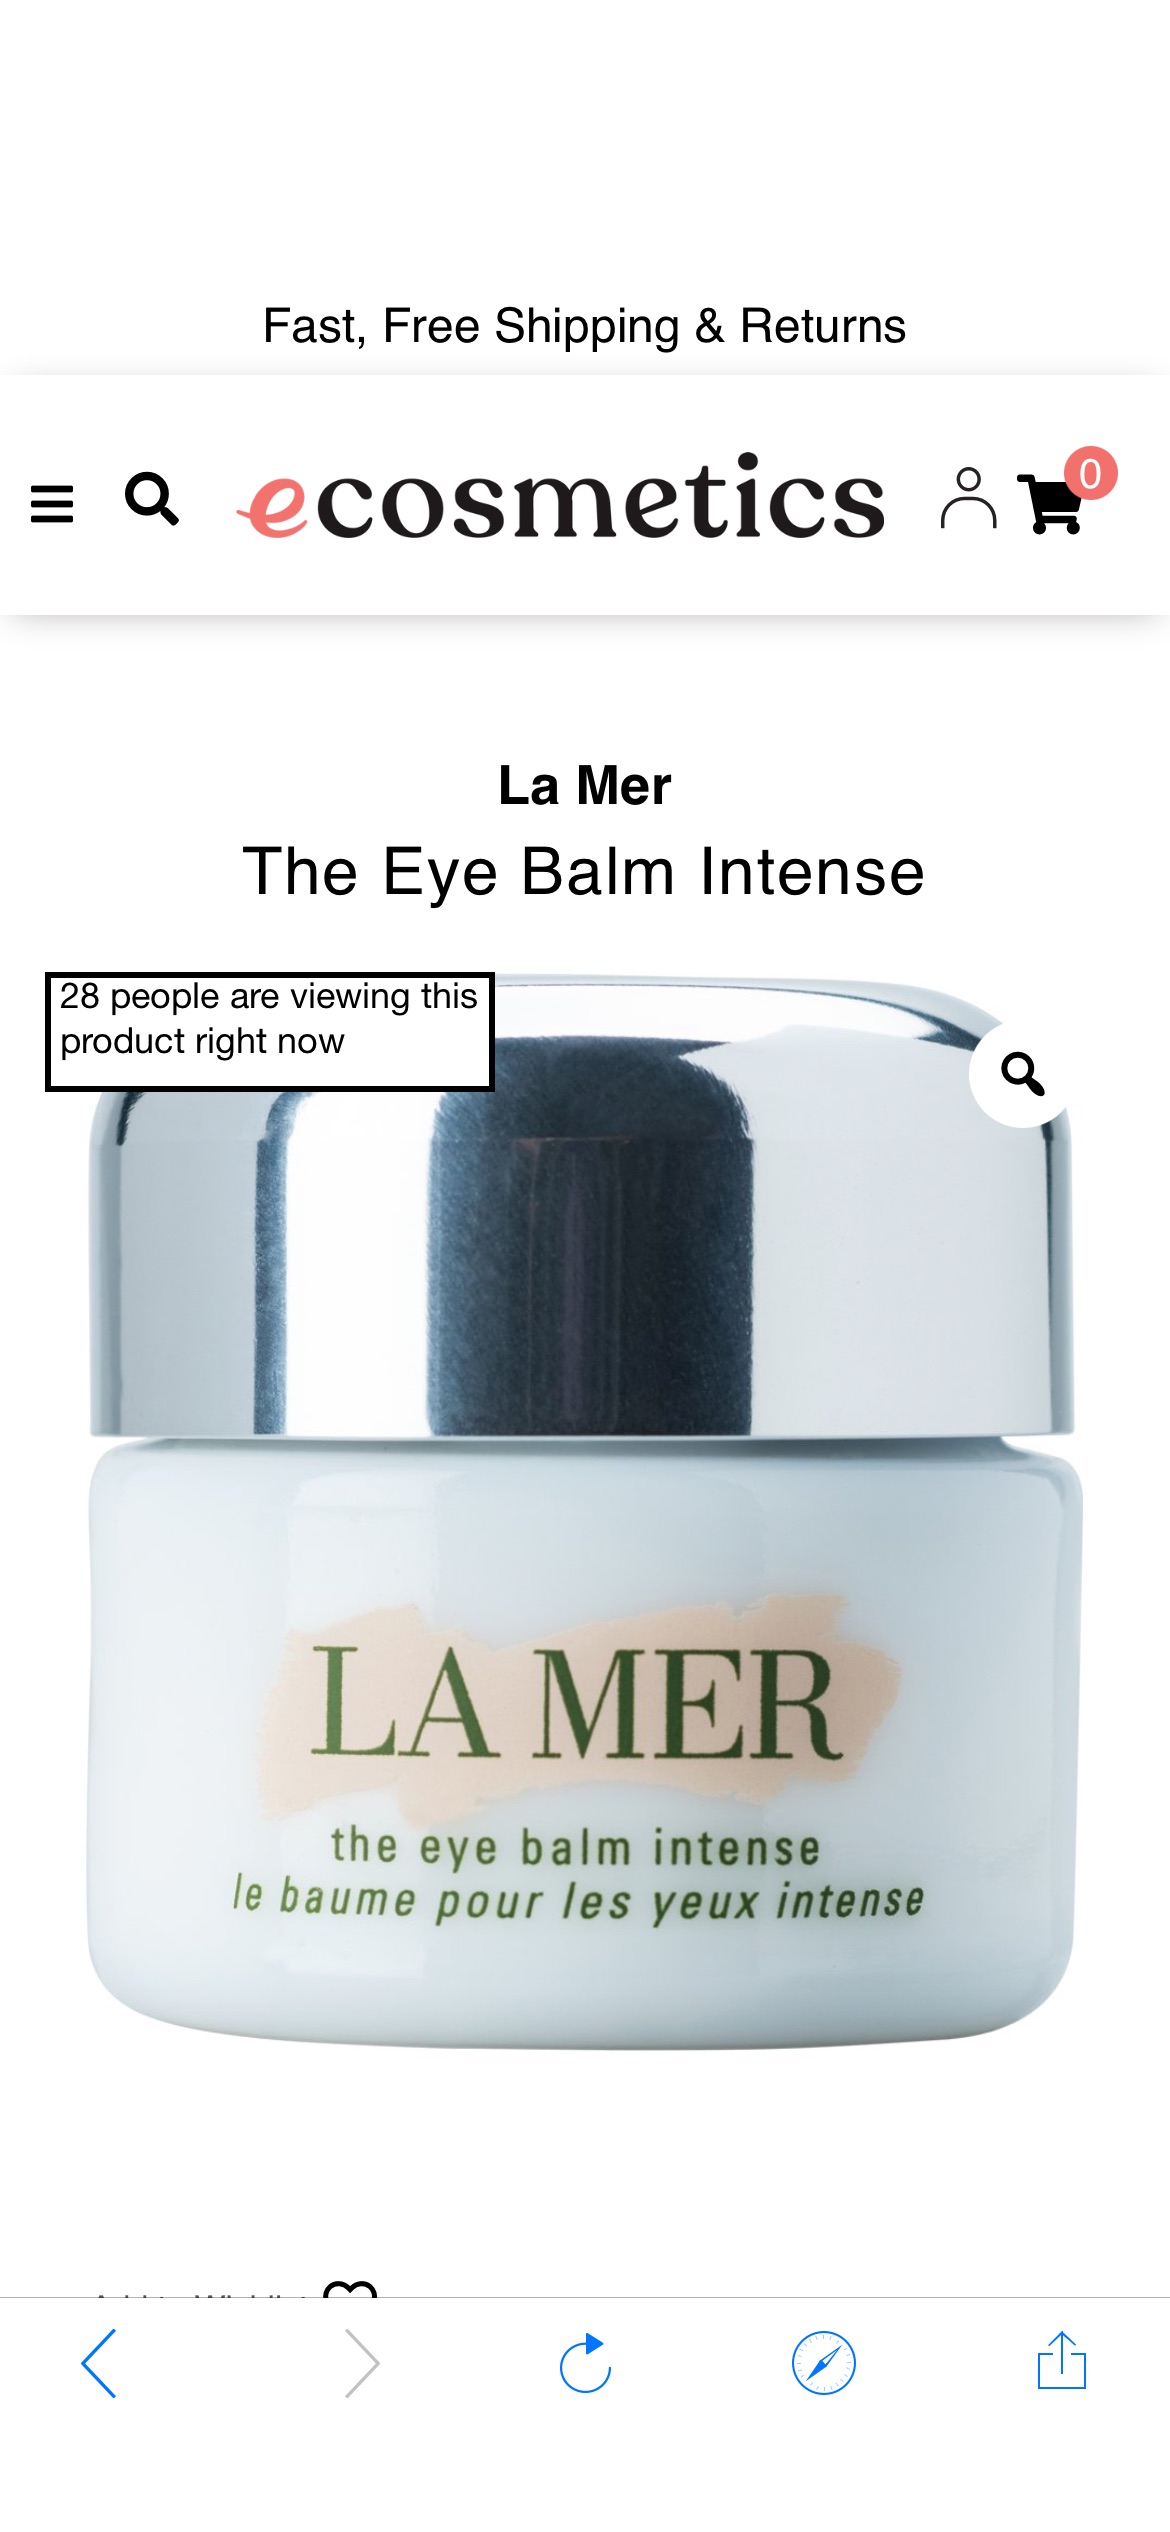 The Eye Balm Intense – eCosmetics: All Major Brands | Fast, Free Shipping | Exceptional Service | 100% Guaranteed